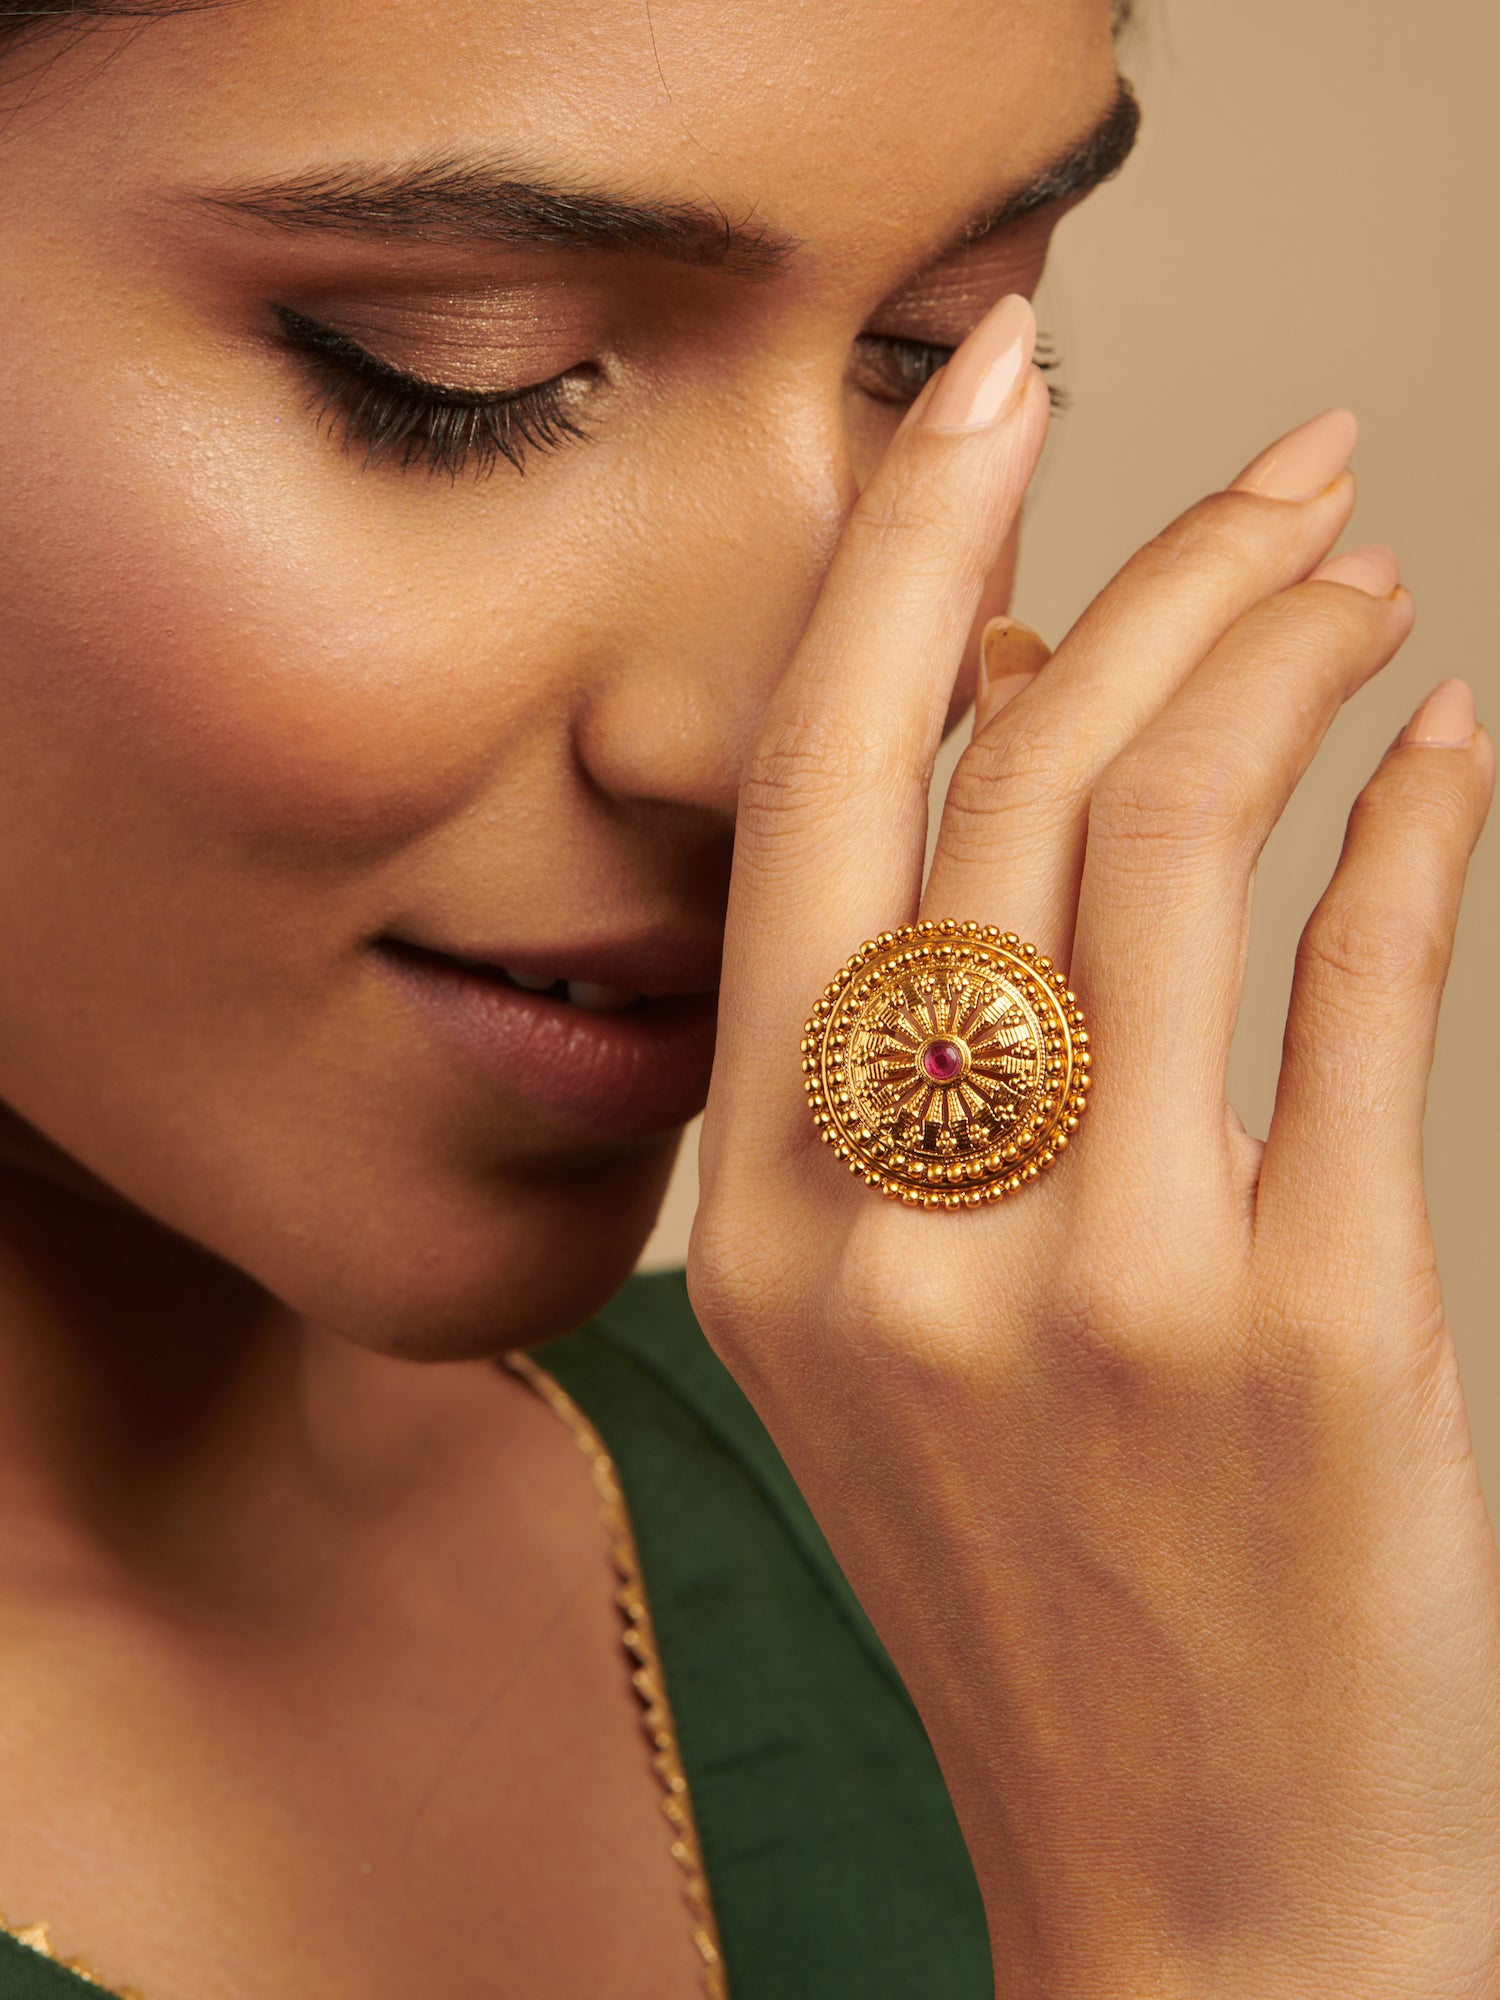 Antique Finger Ring With Diva-like detailed design from Kushal's